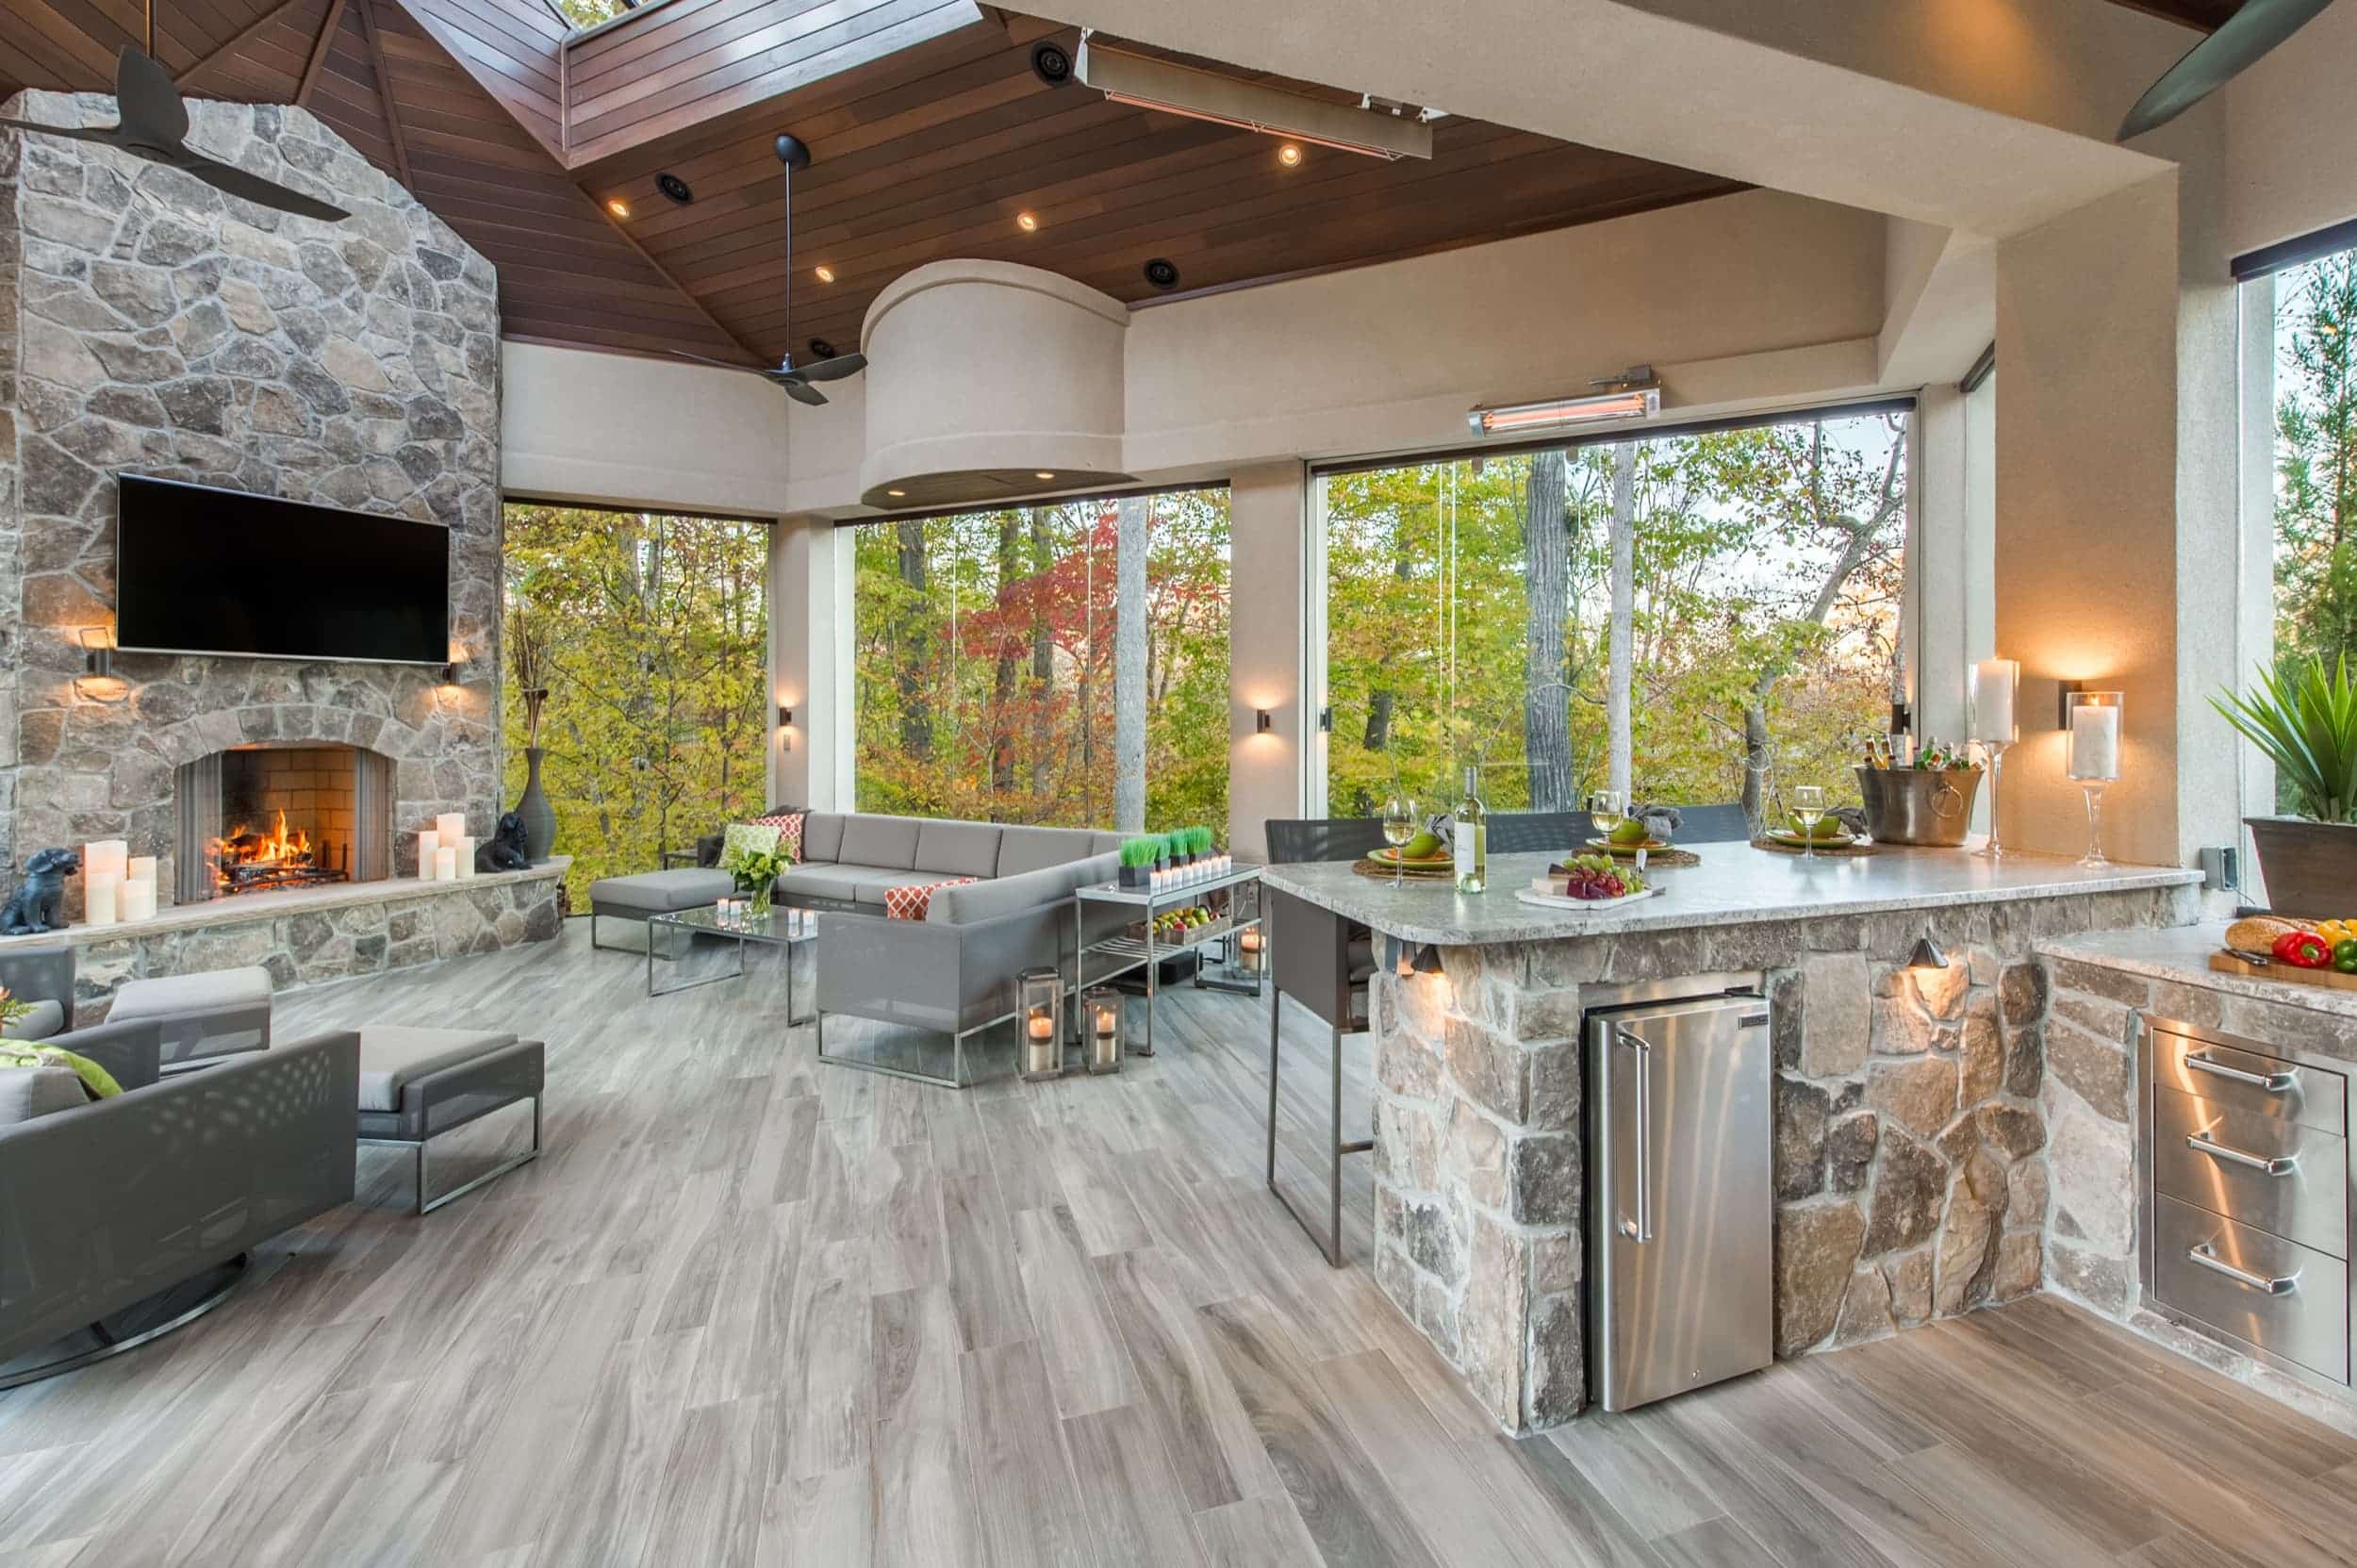 An outdoor kitchen with stone walls and a fireplace.